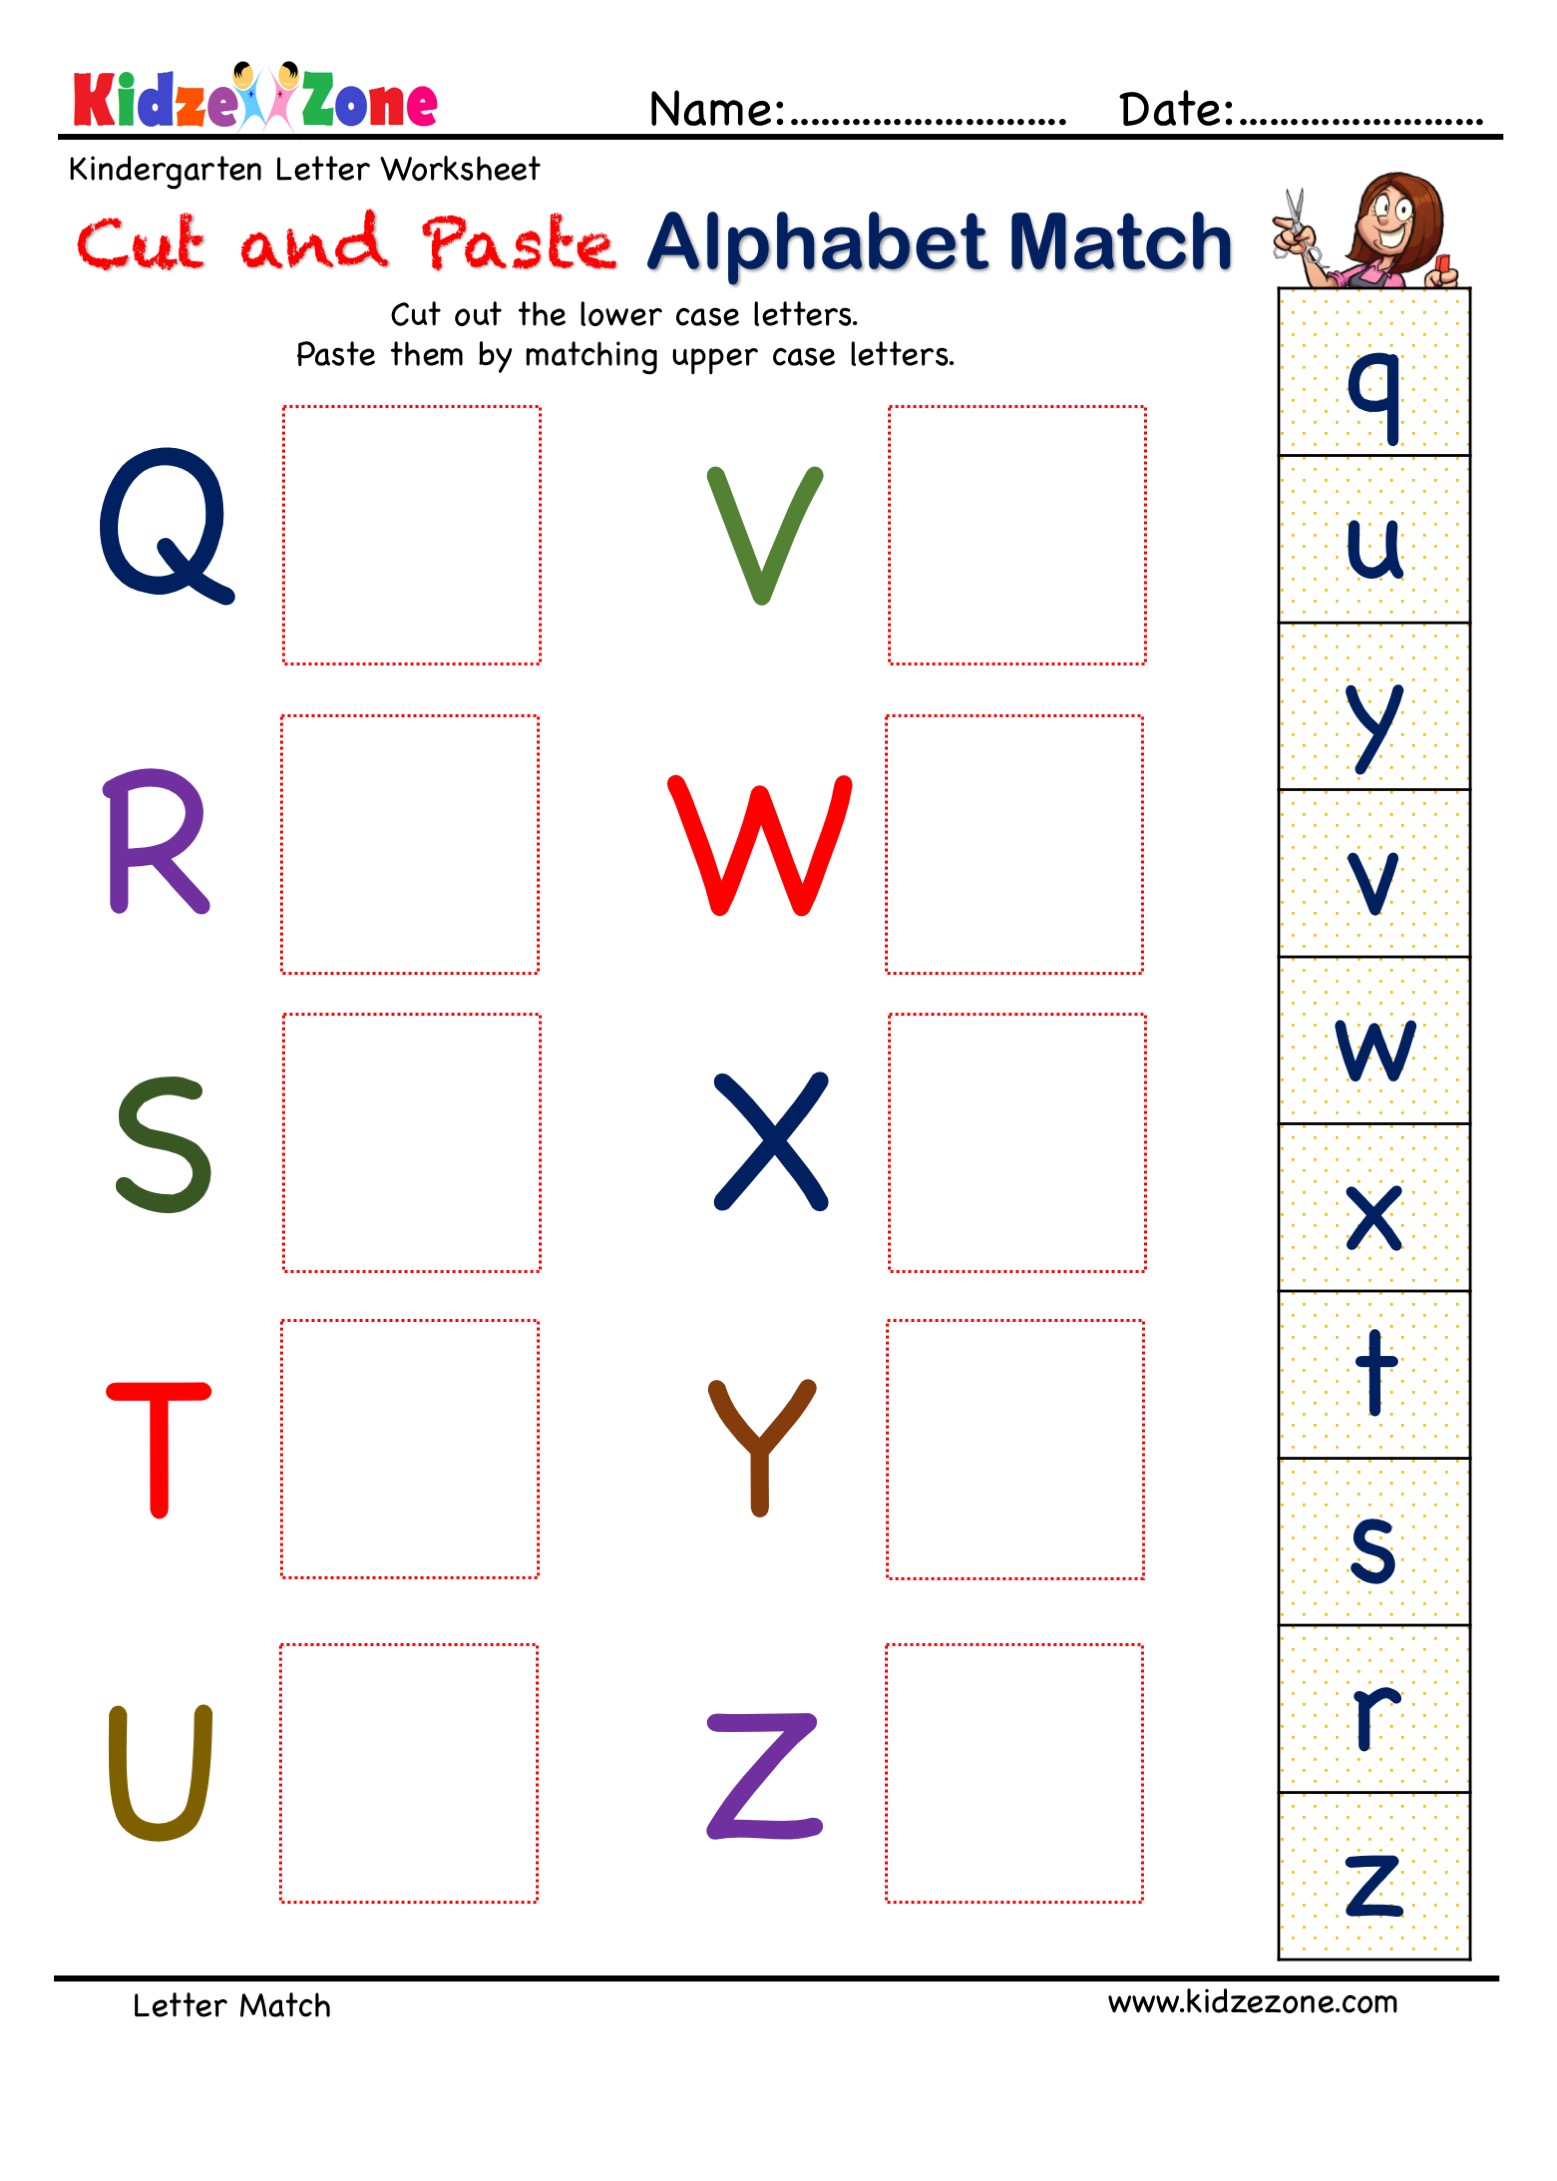 PreK A to Z Letter Matching Worksheet Match Uppercase to lowercase